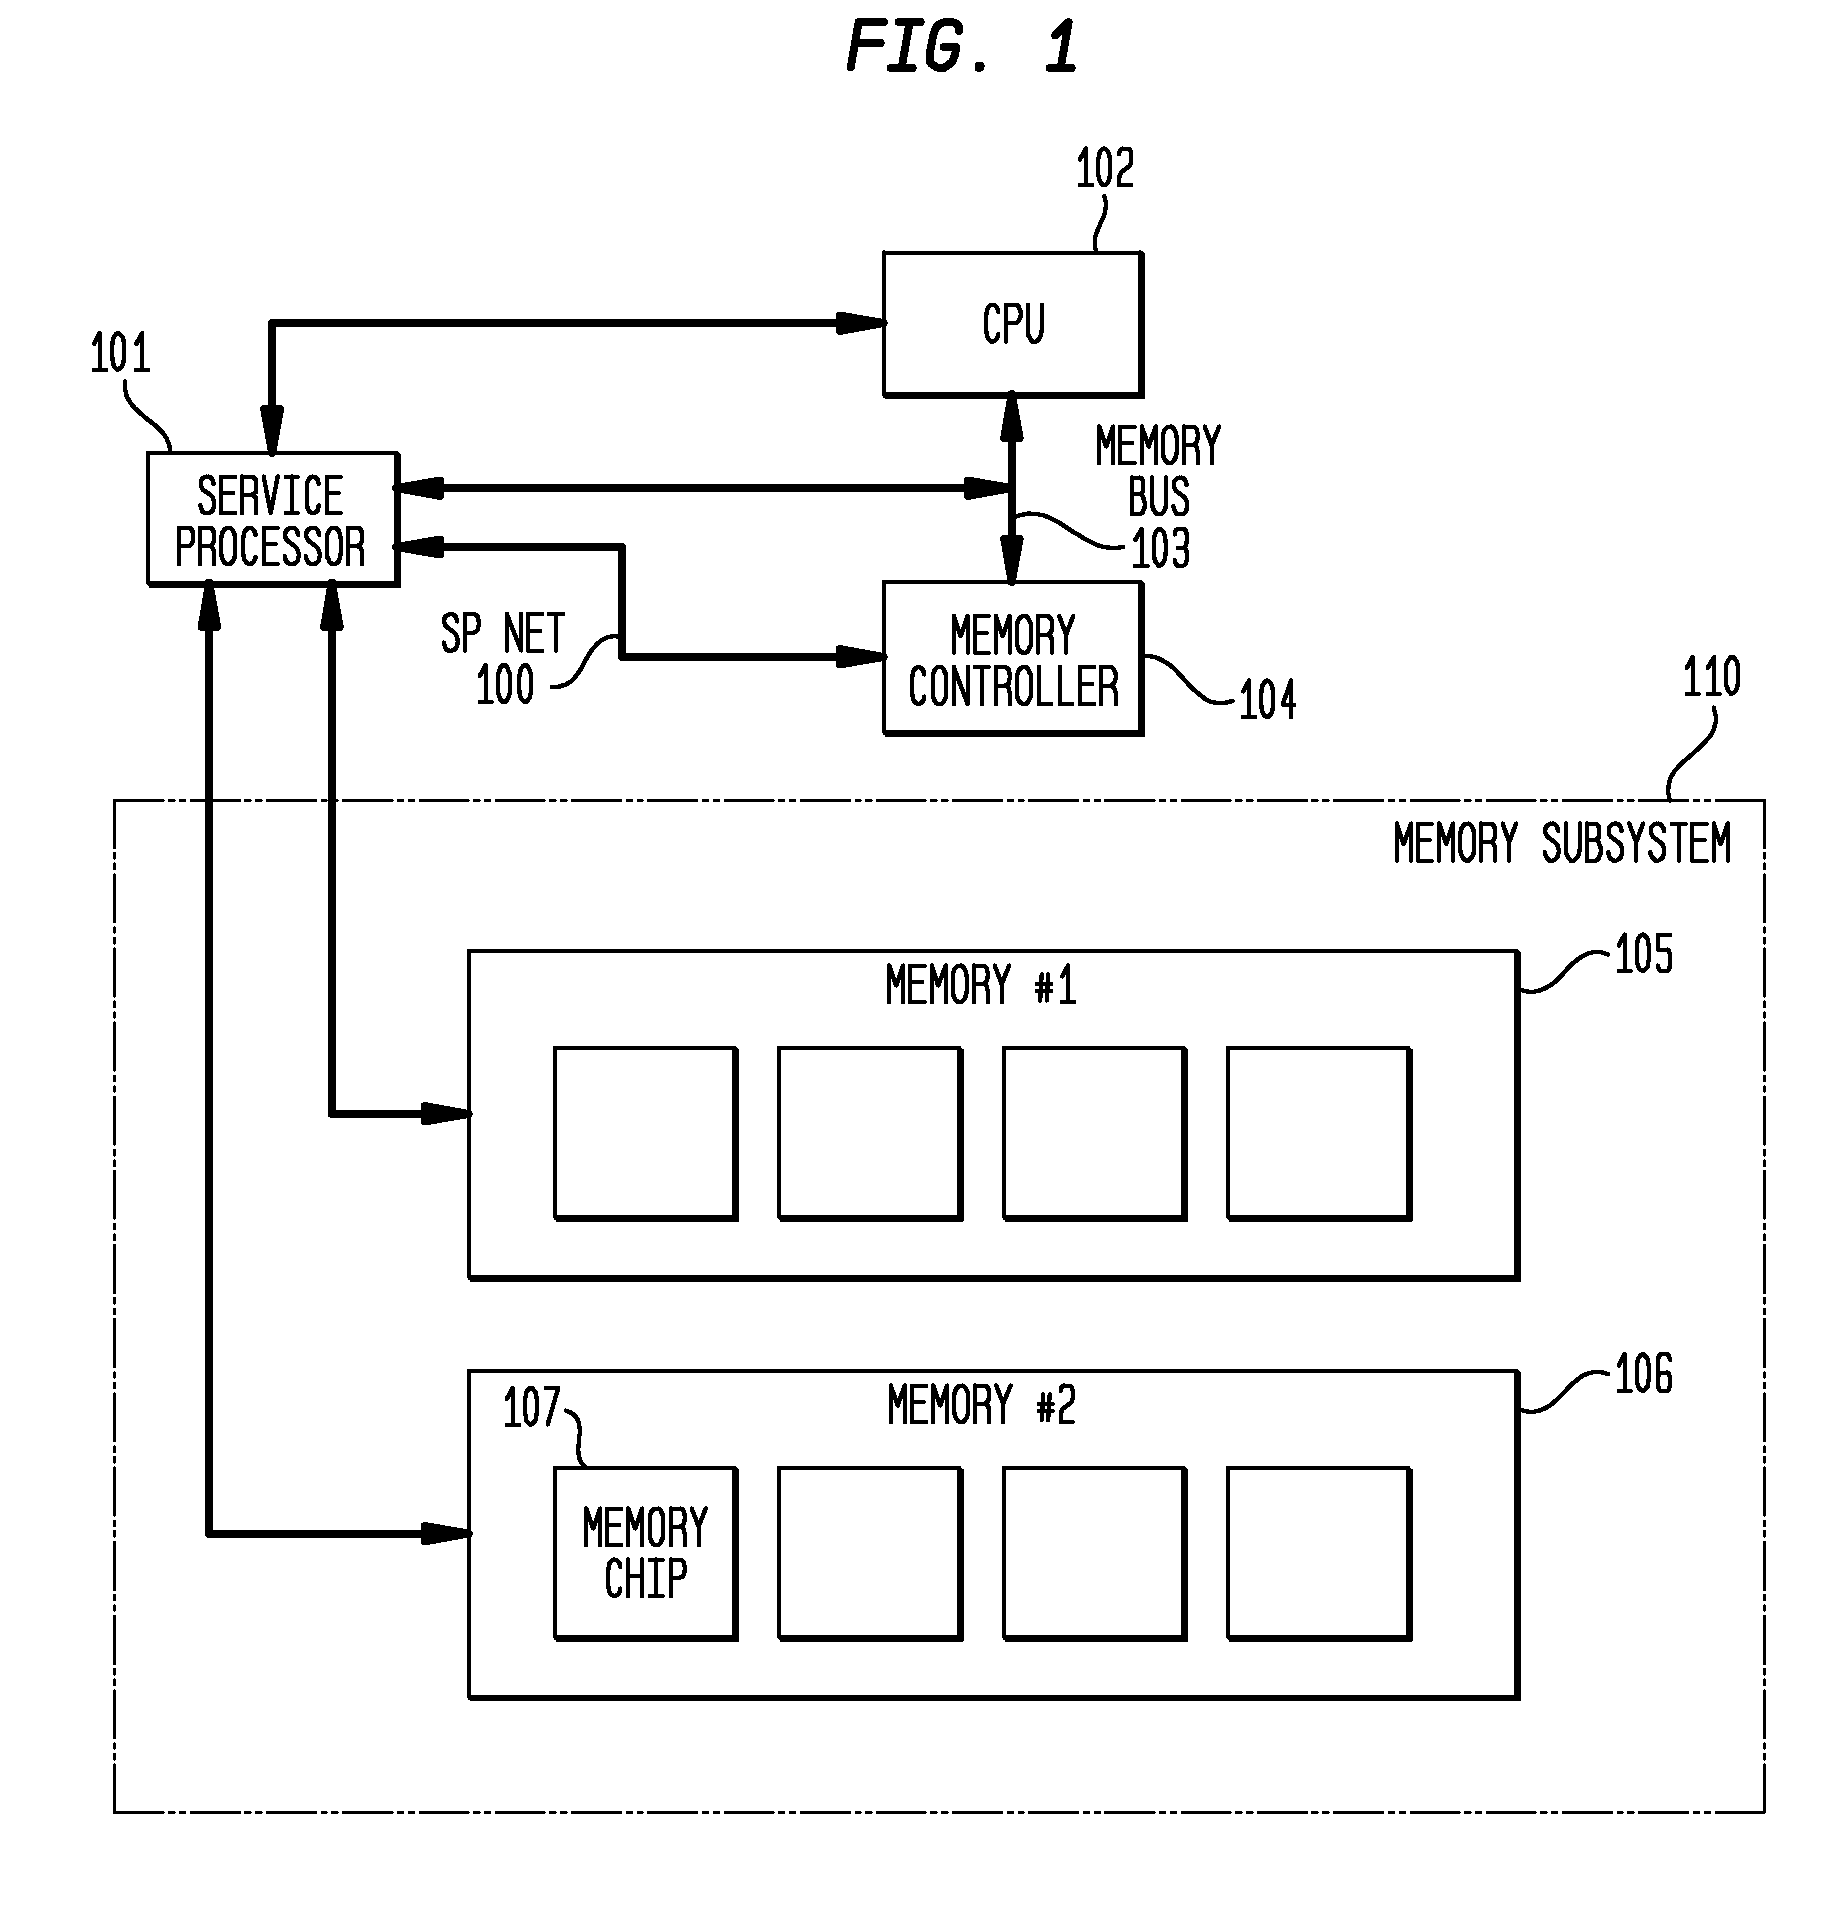 Method, Apparatus and Program Product to Concurrently Detect, Repair, Verify and Isolate Memory Failures